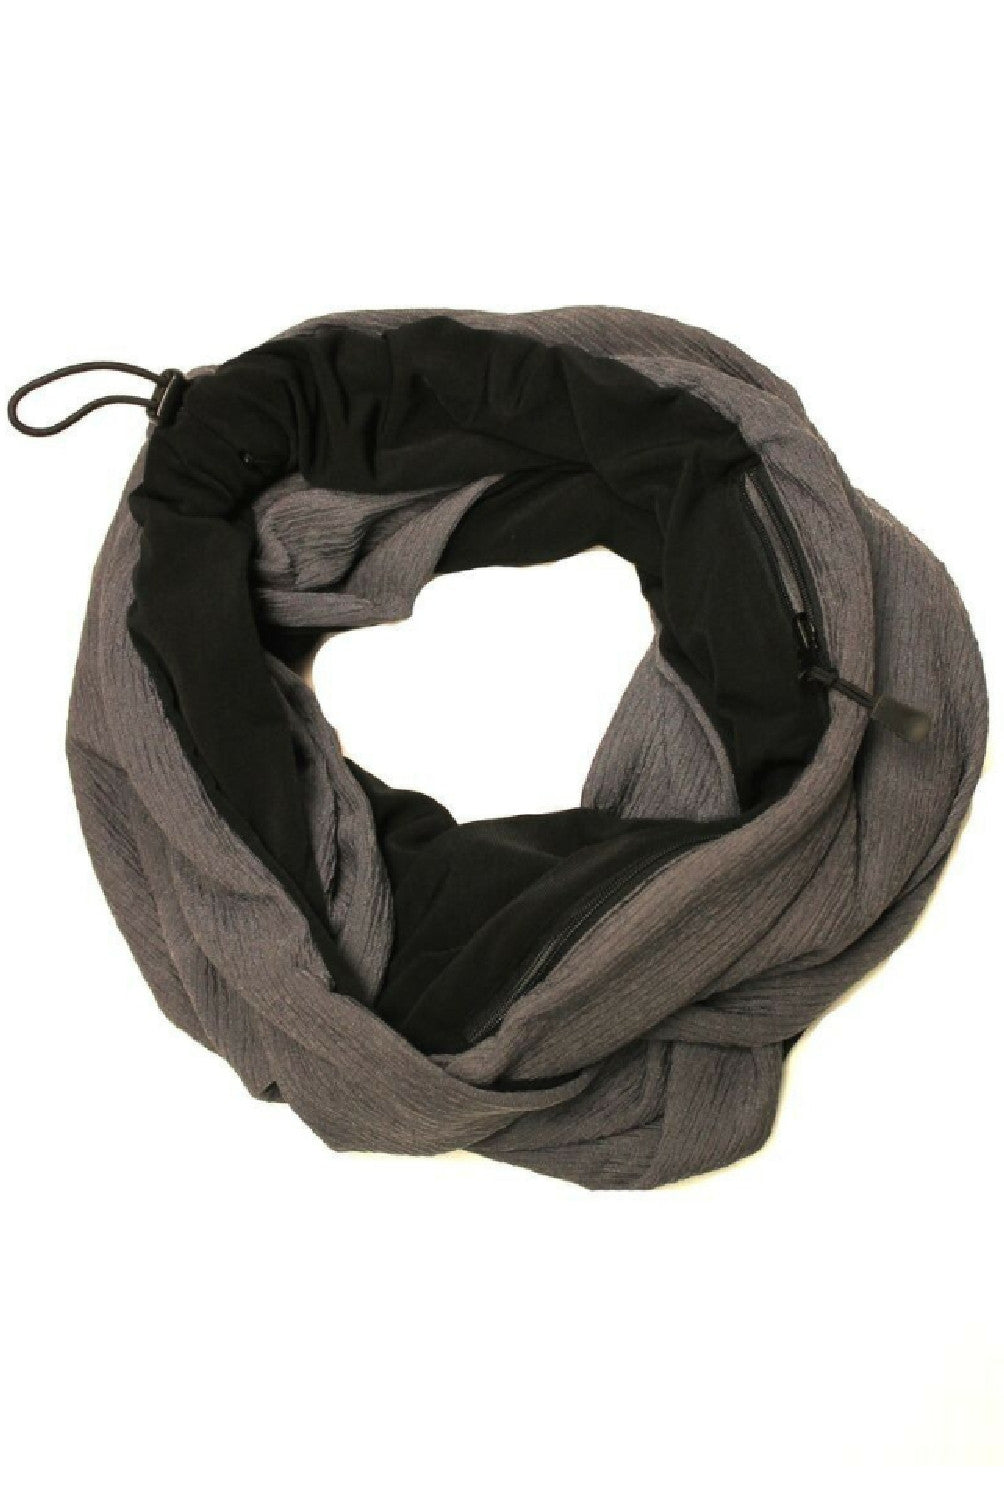 ORIGINAL Convertible Infinity Scarf with Pockets – SHOLDIT®